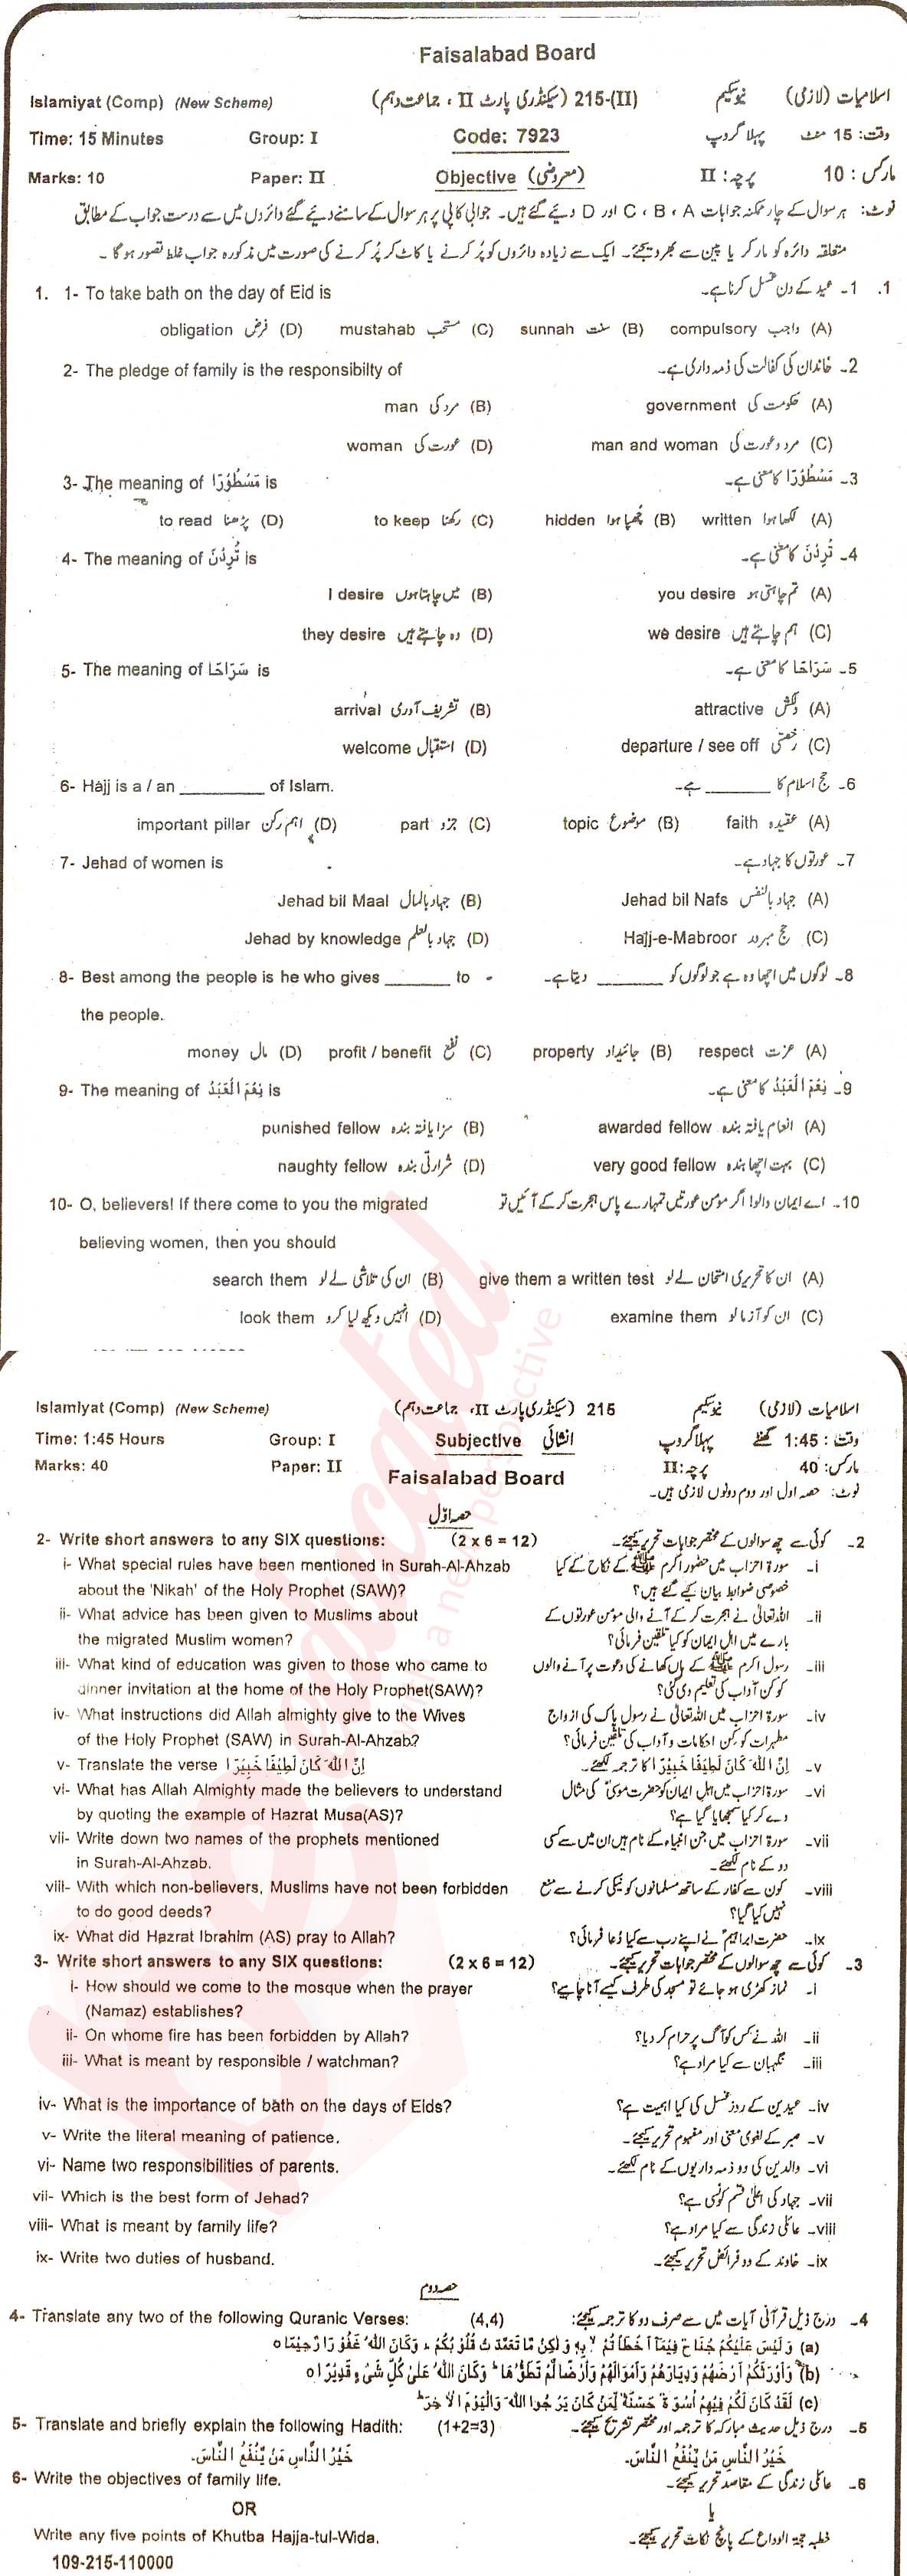 Islamiat (Compulsory) 10th class Past Paper Group 1 BISE Faisalabad 2015